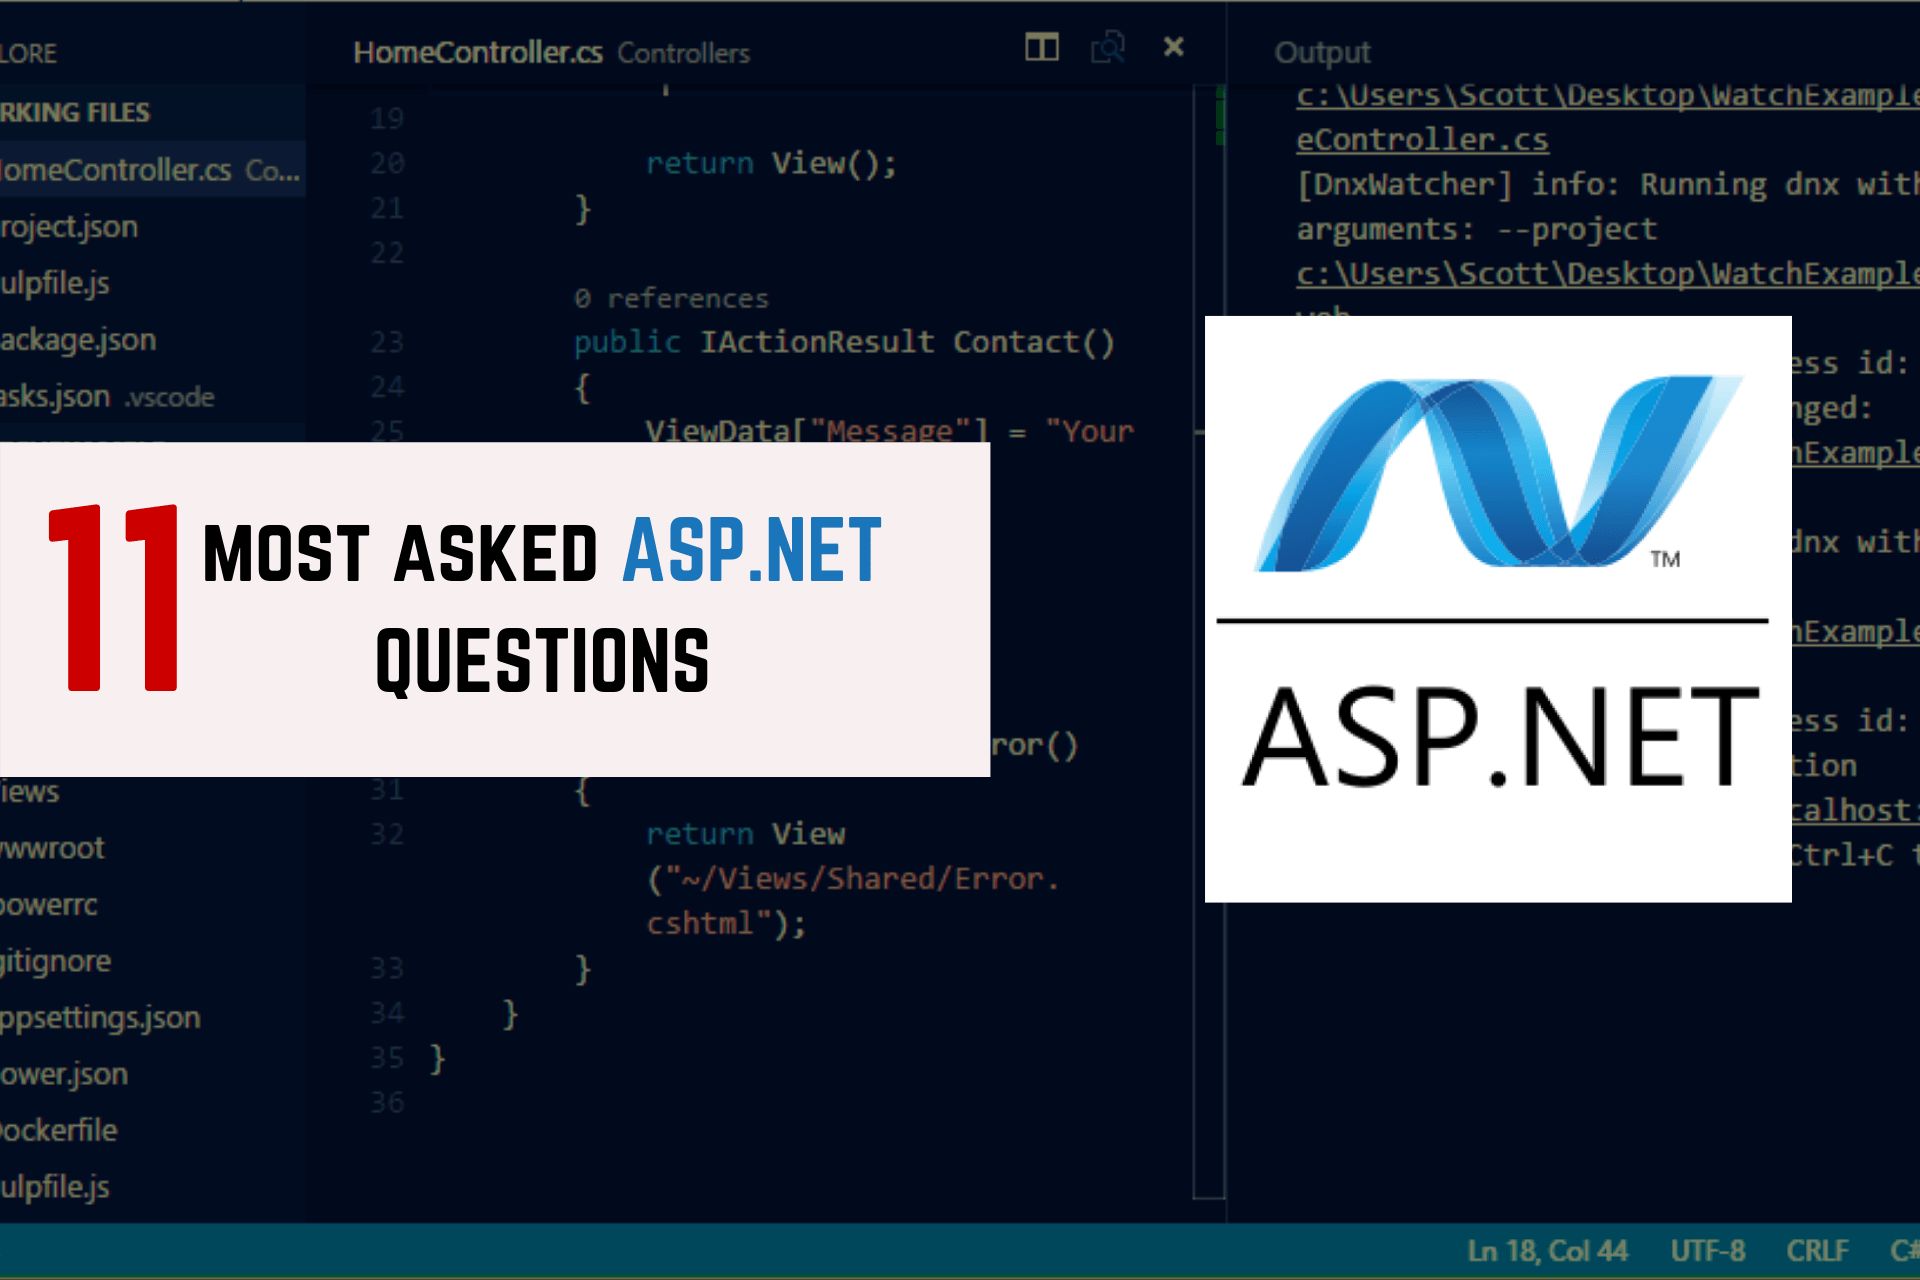 featured image - ASP.NET FAQs